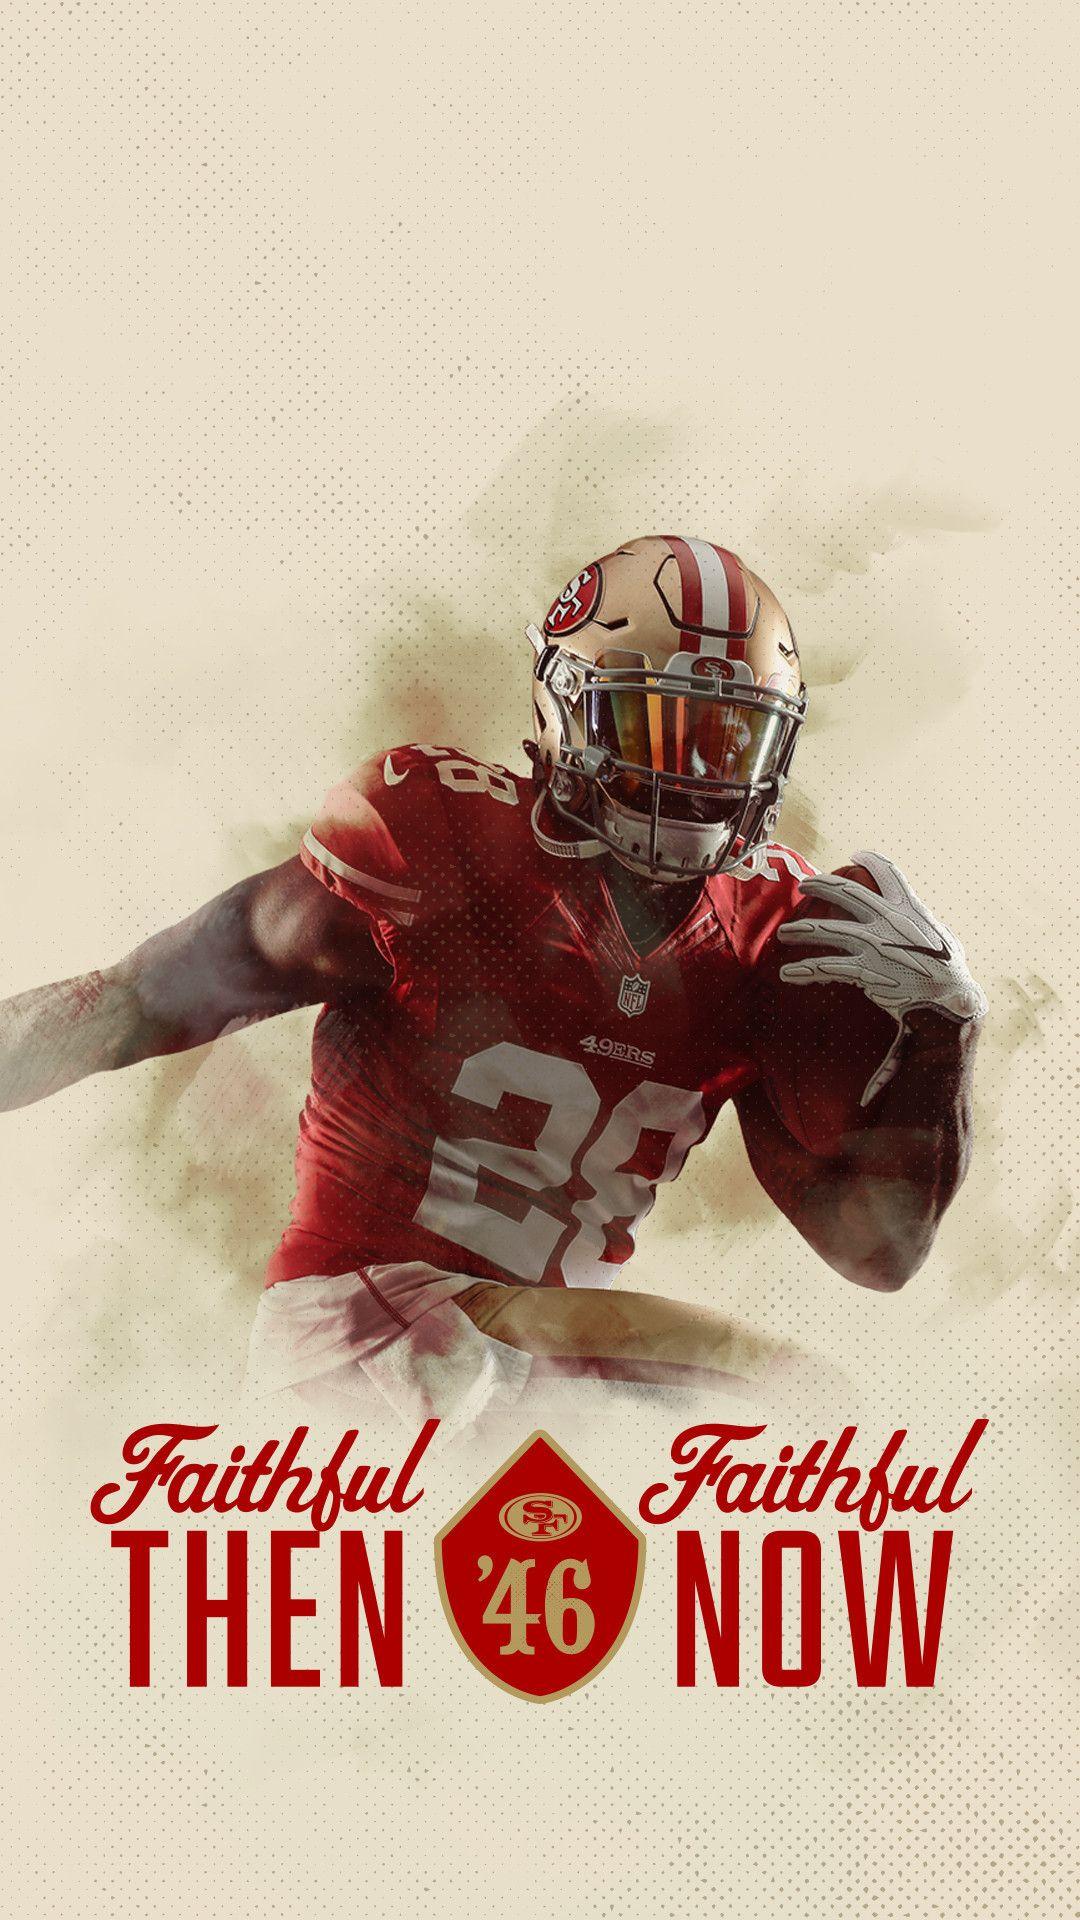 Phone Wallpaper I made leading into the 2013 Playoffs 1080p x 1920p  r 49ers